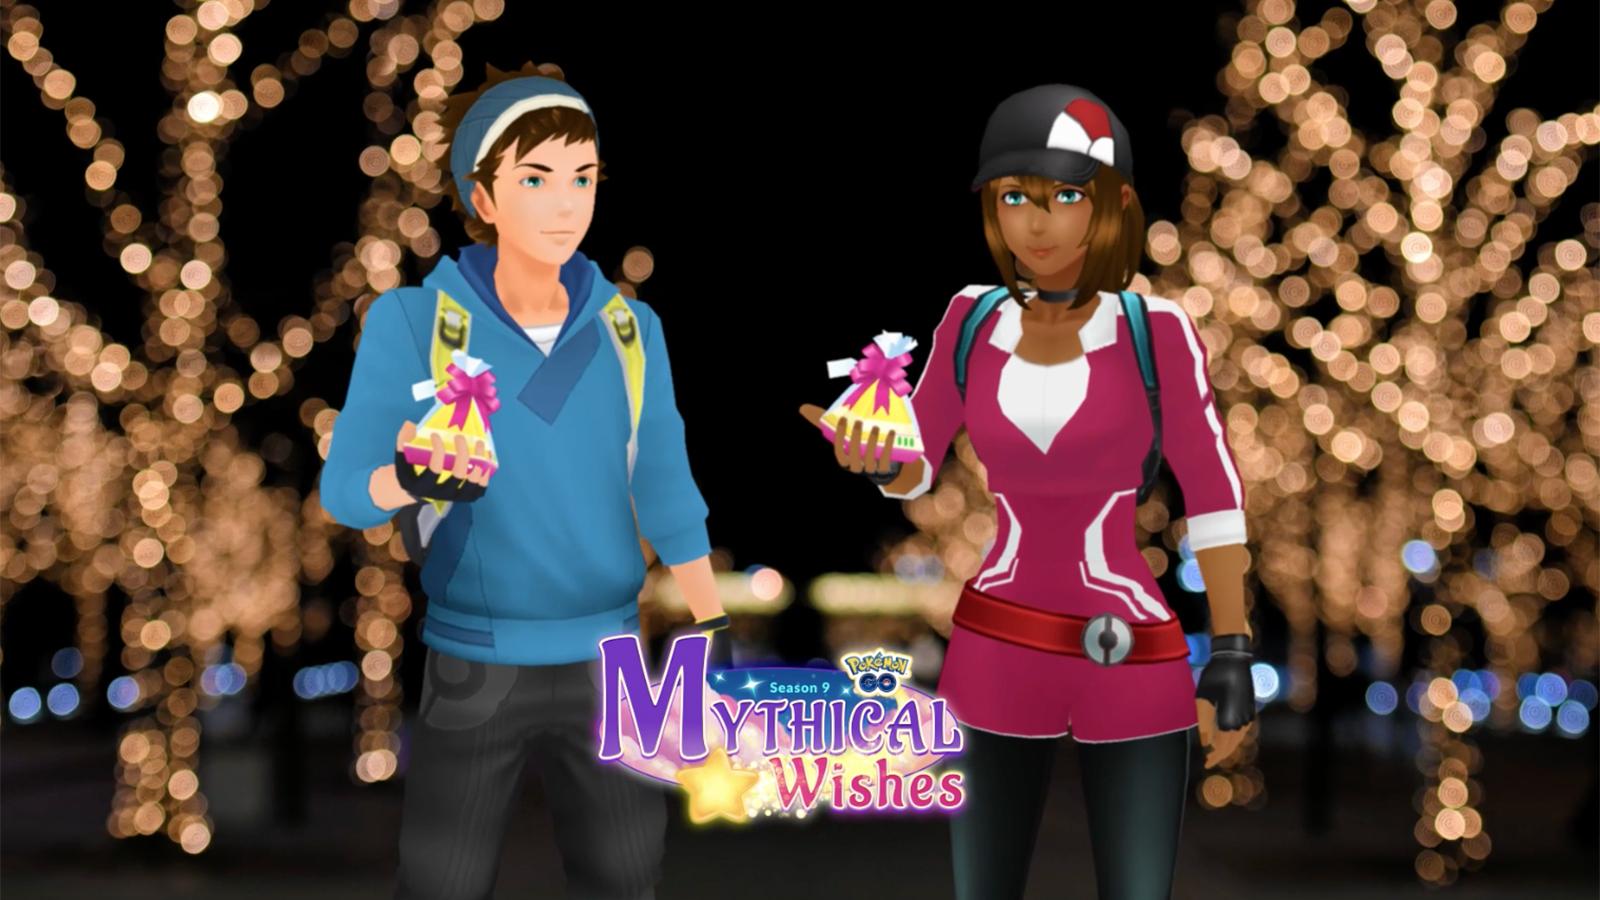 Pokémon Go' Holiday Event: Start Time, Field Research, Vanillite and More